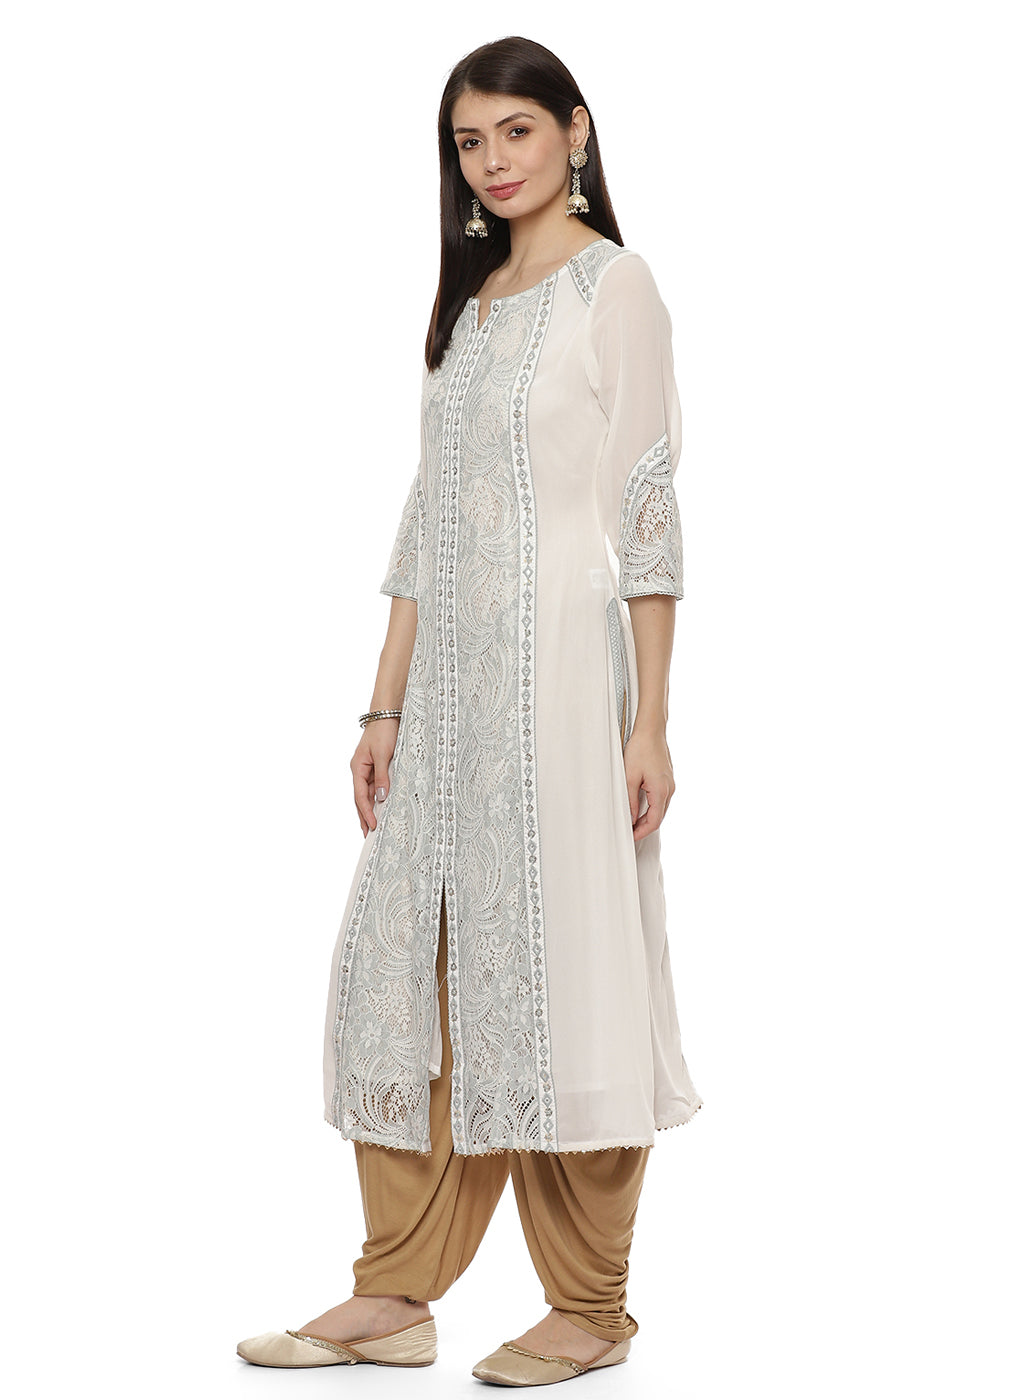 Green Nargis Collection Embroidered Kurta with Lace-Inserts